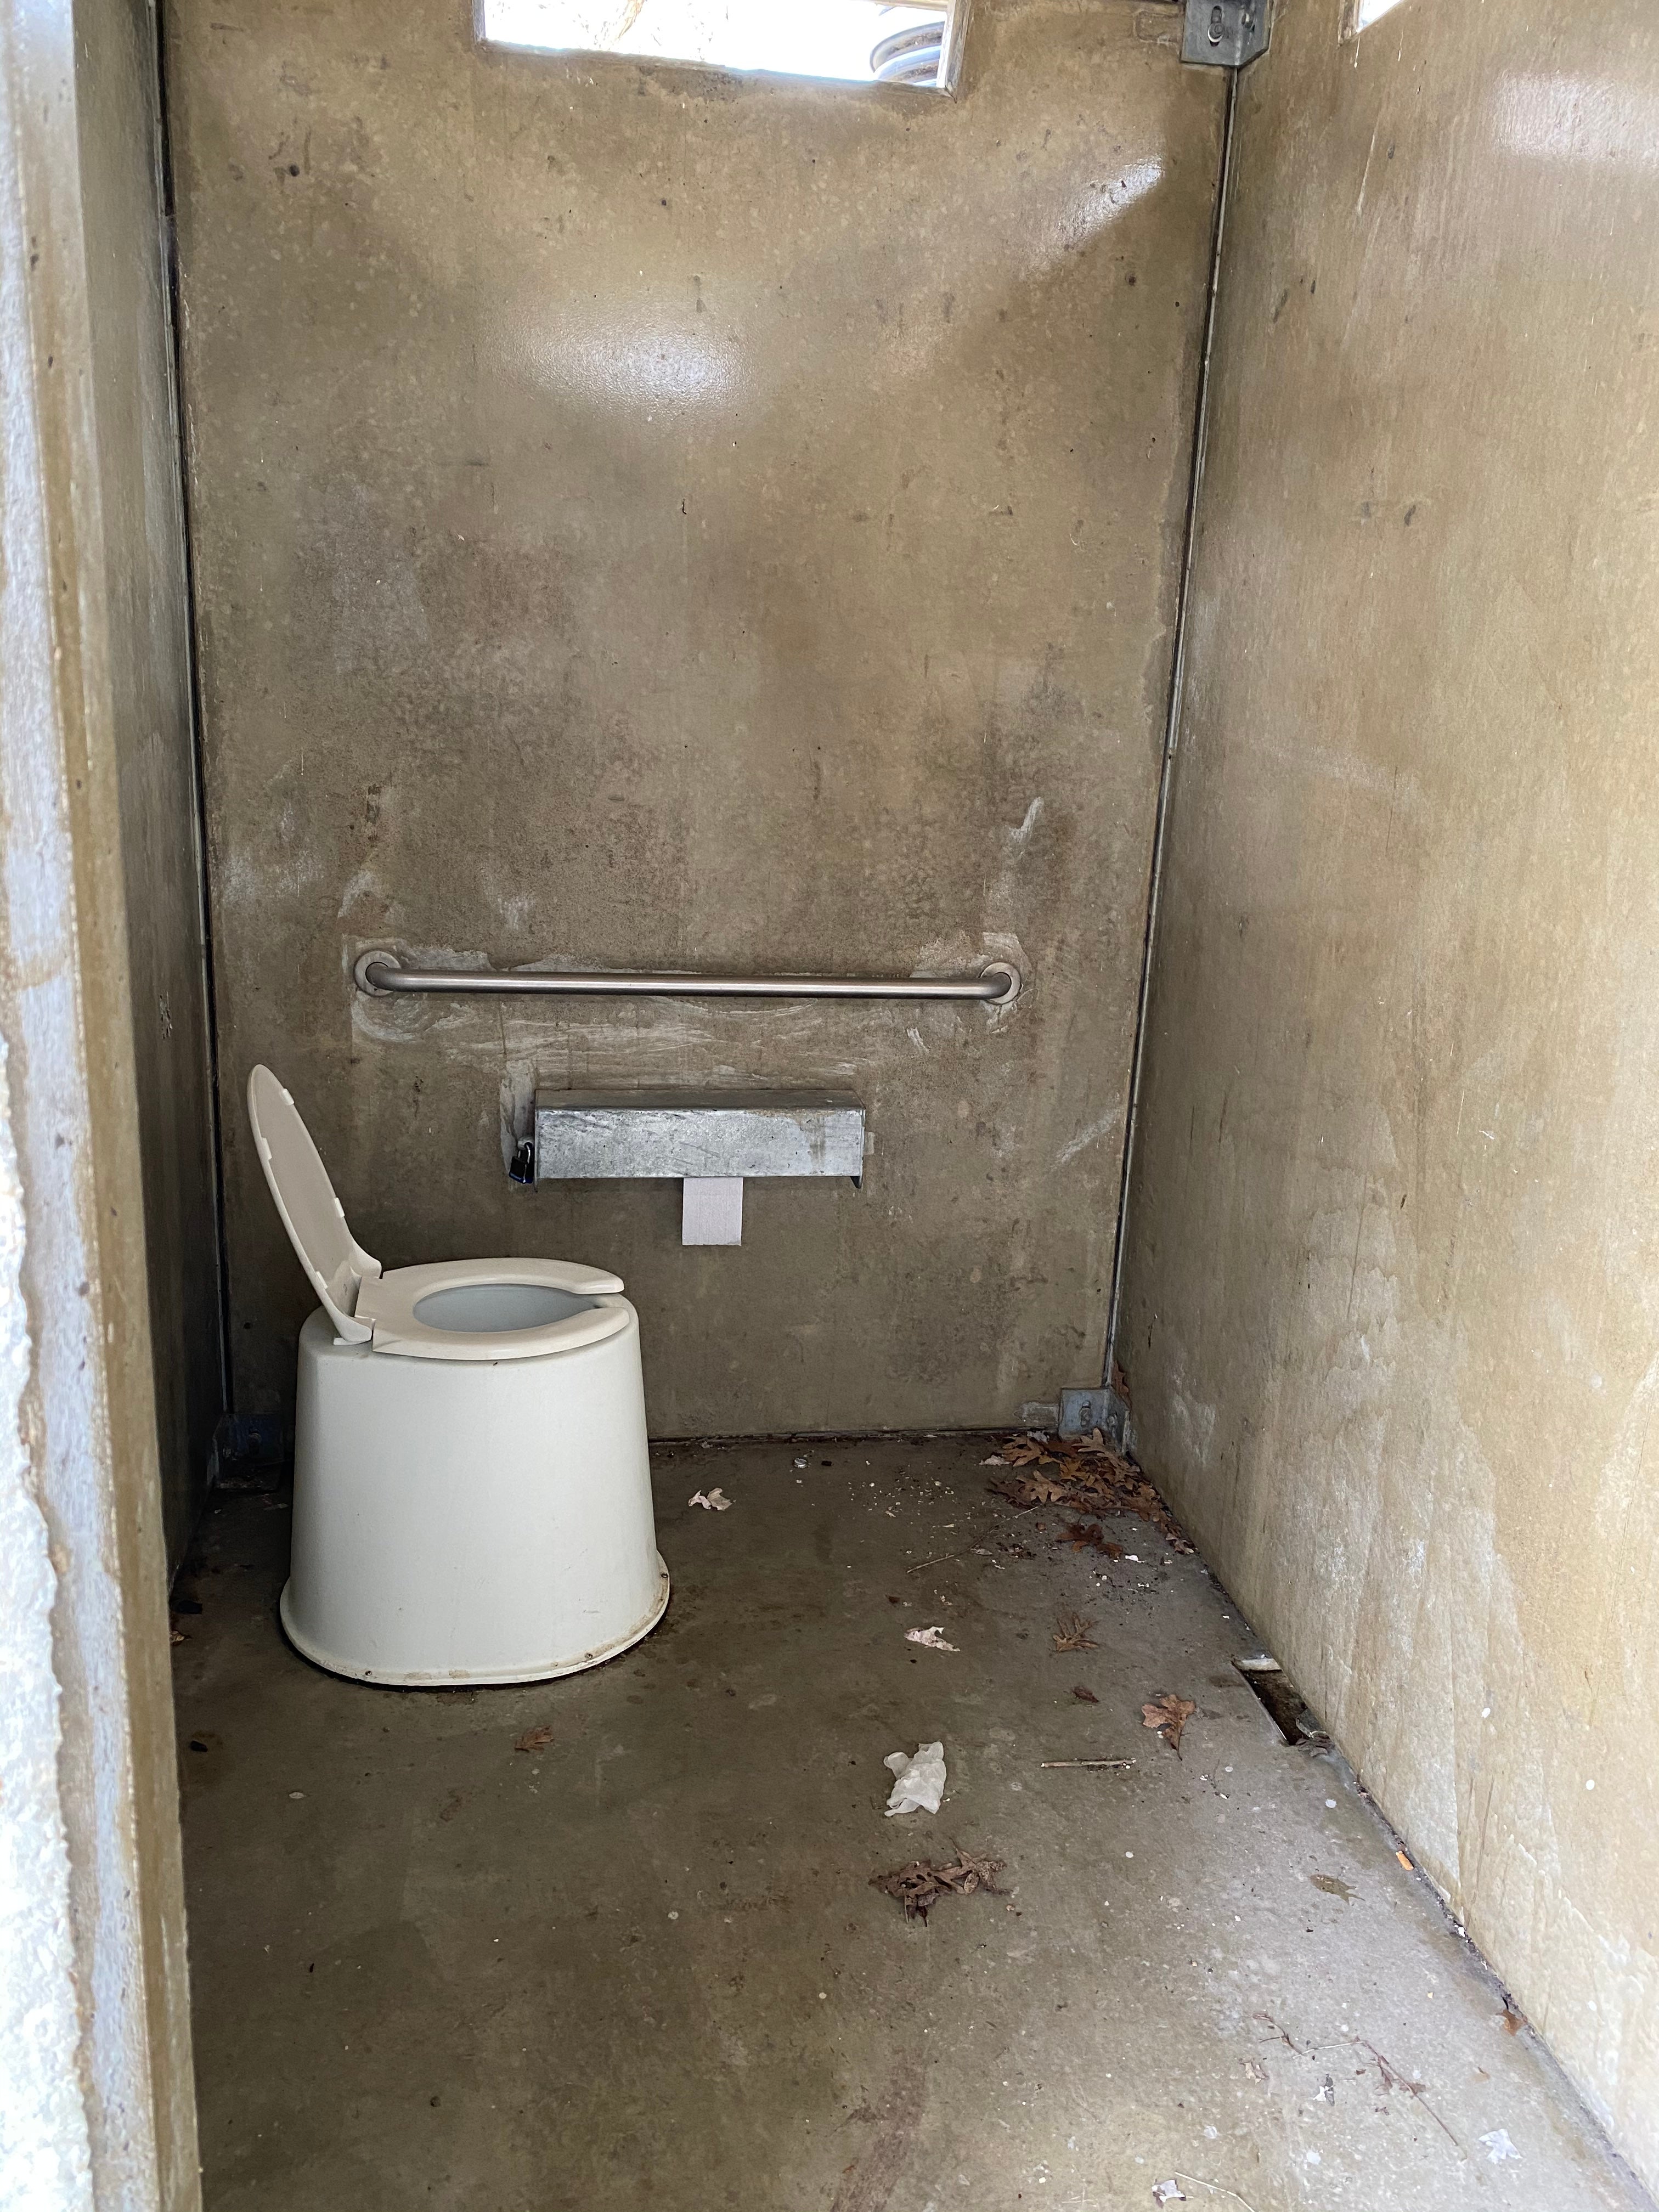 The pit toilet at the “developed” campground.